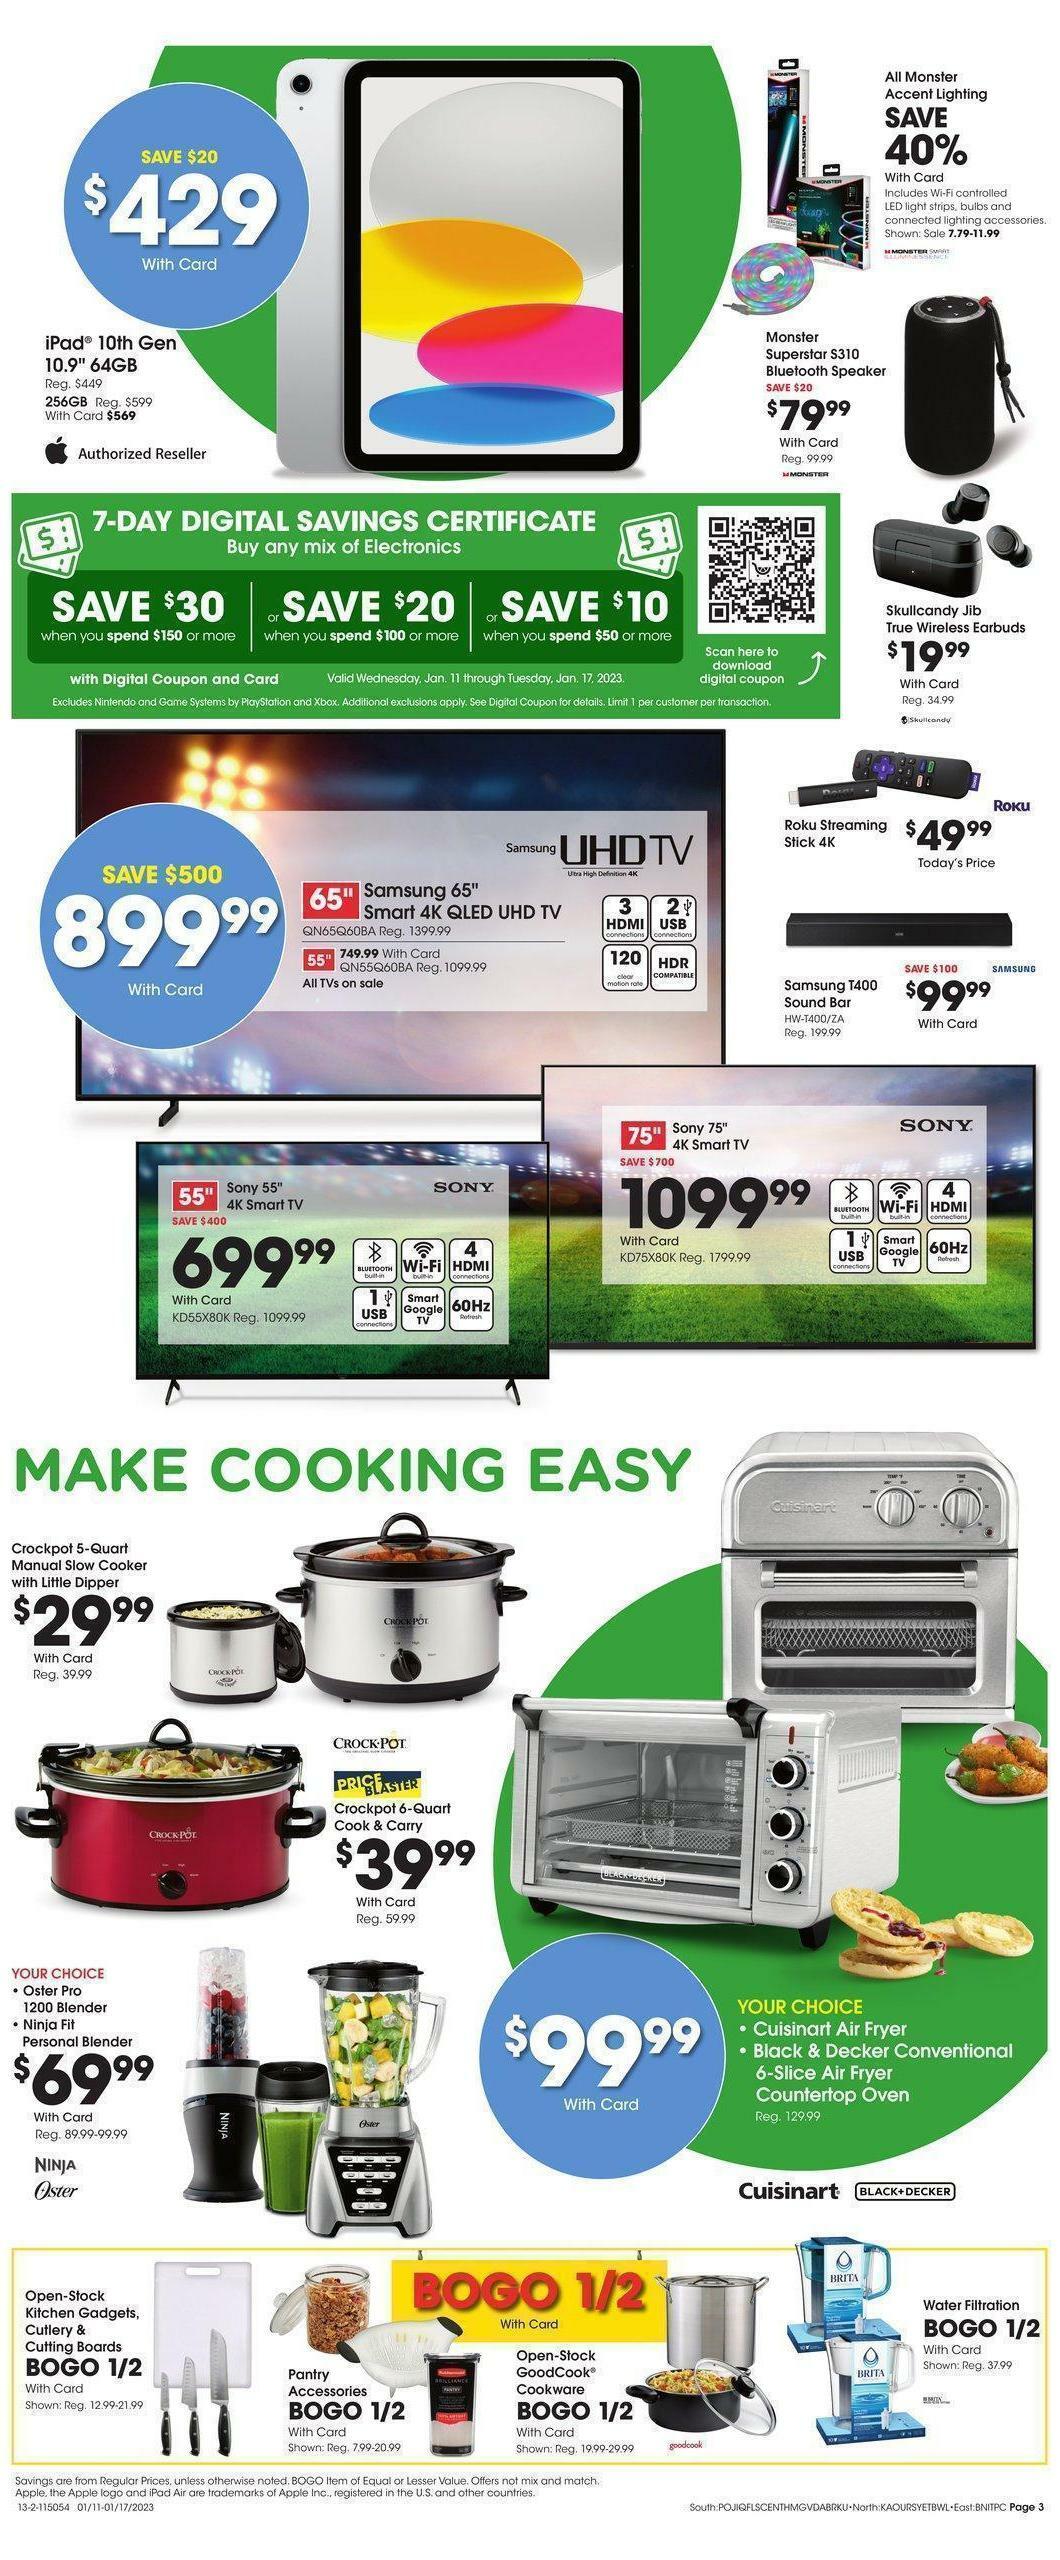 Fred Meyer General Merchandise Weekly Ad from January 11